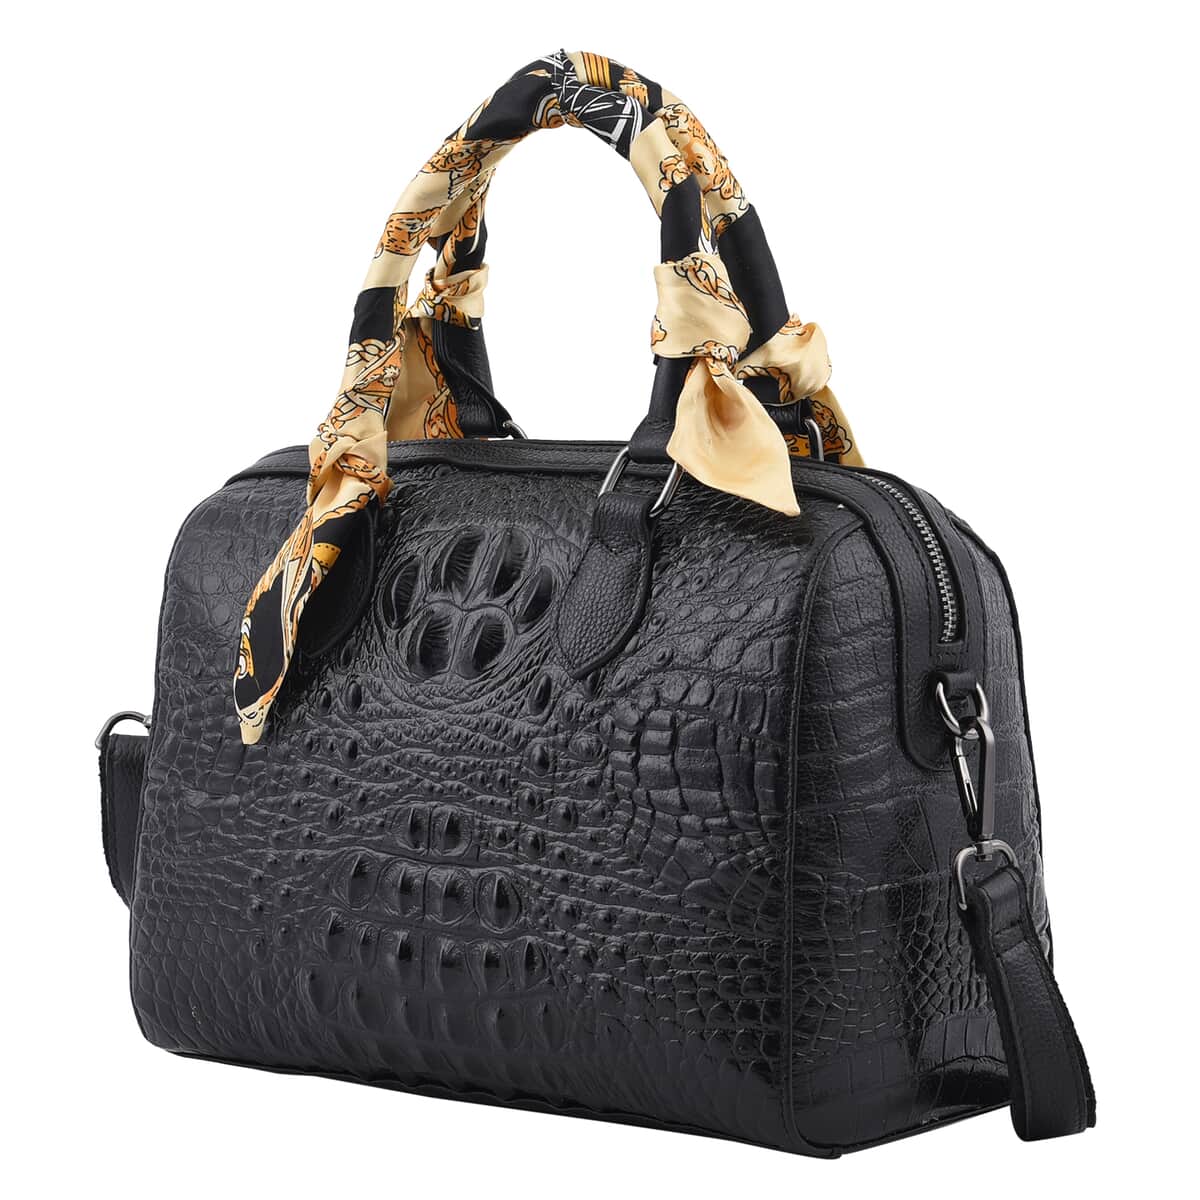 Black Crocodile Embossed Pattern Genuine Leather Crossbody Bag (11"x5"x9") with Hand Scarf Strap and Shoulder Strap image number 4